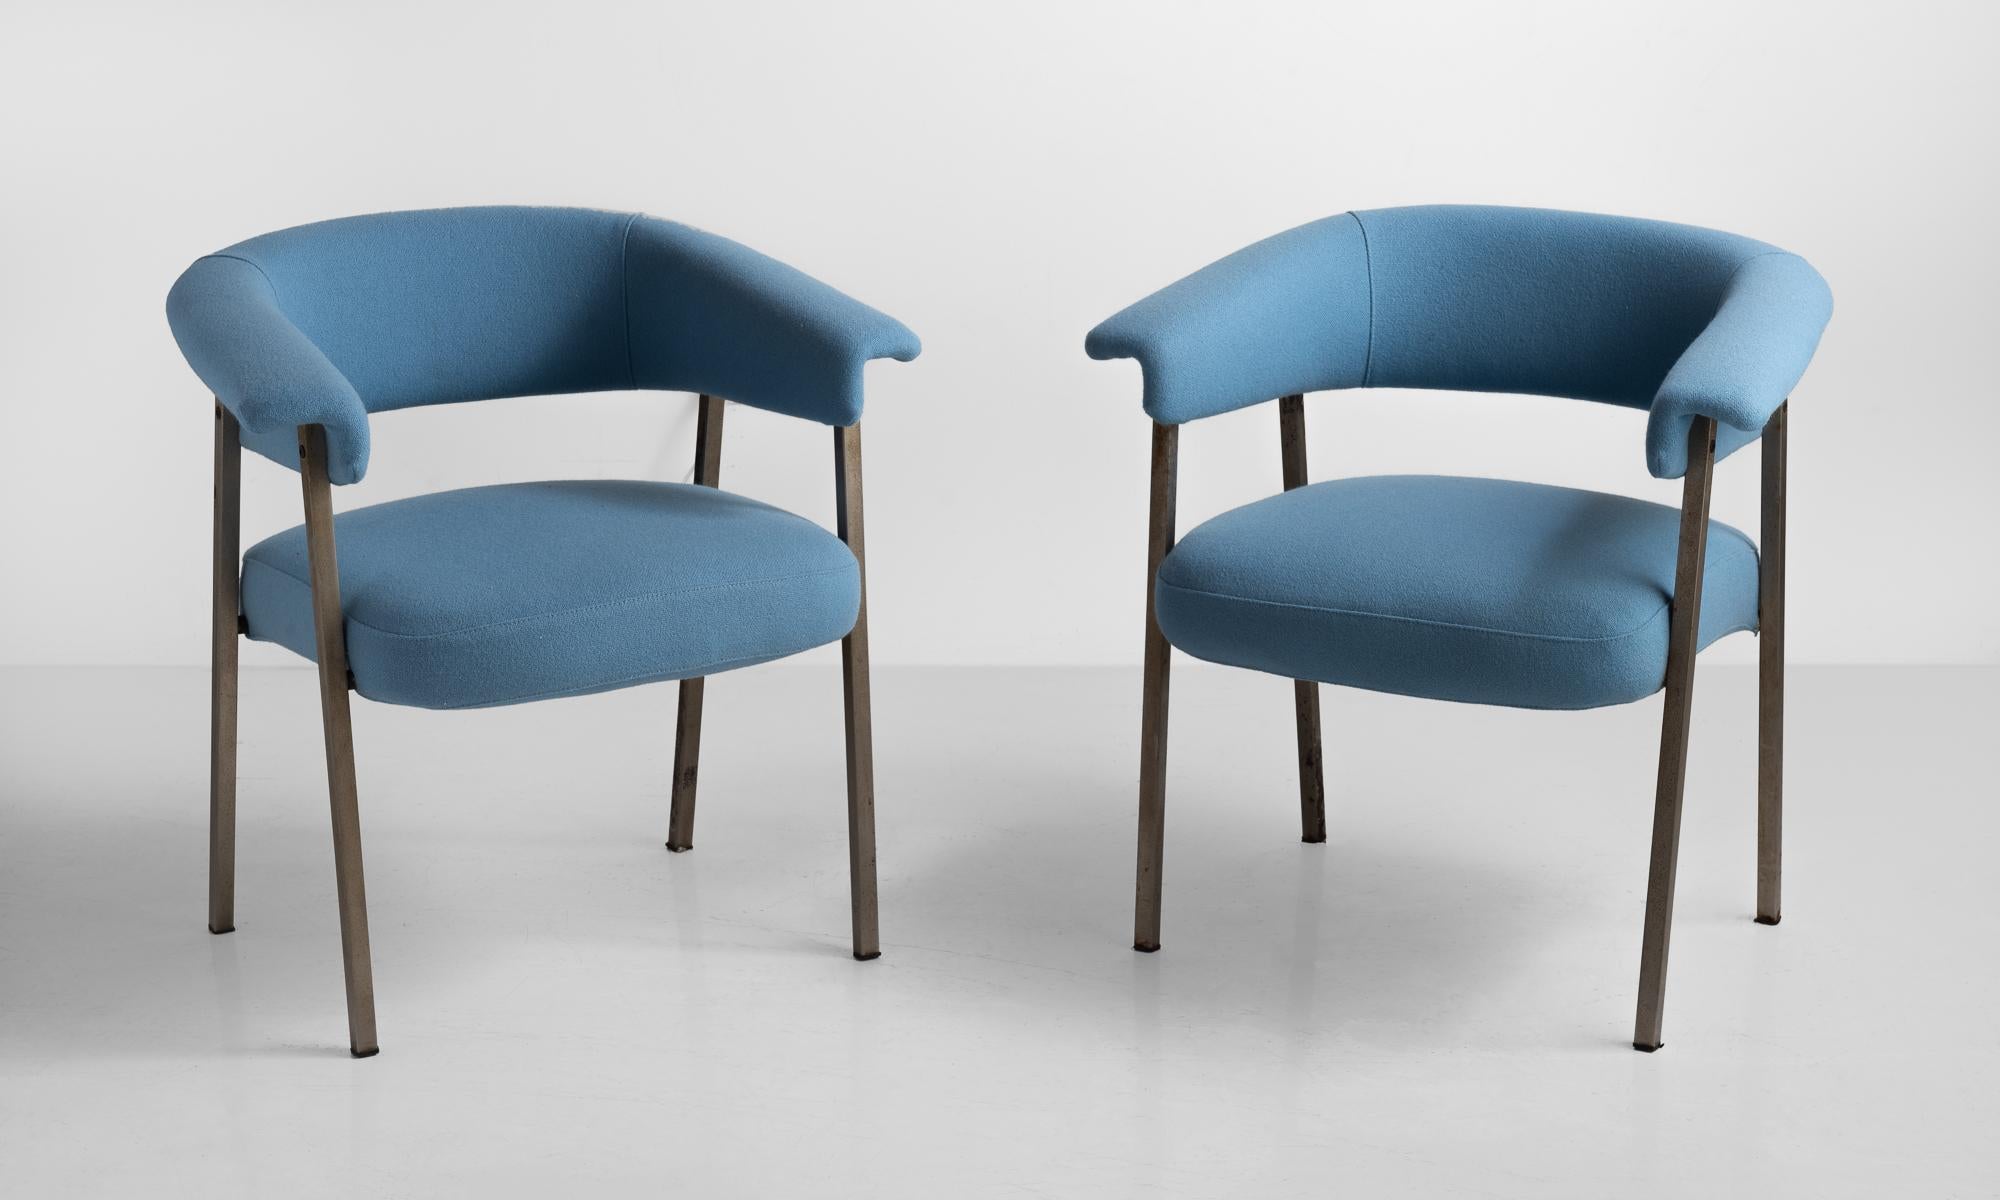 Pair of model P18 armchairs by Gastone Rinaldi for RIMA, circa 1960.

Newly reupholstered in mahram fabric.